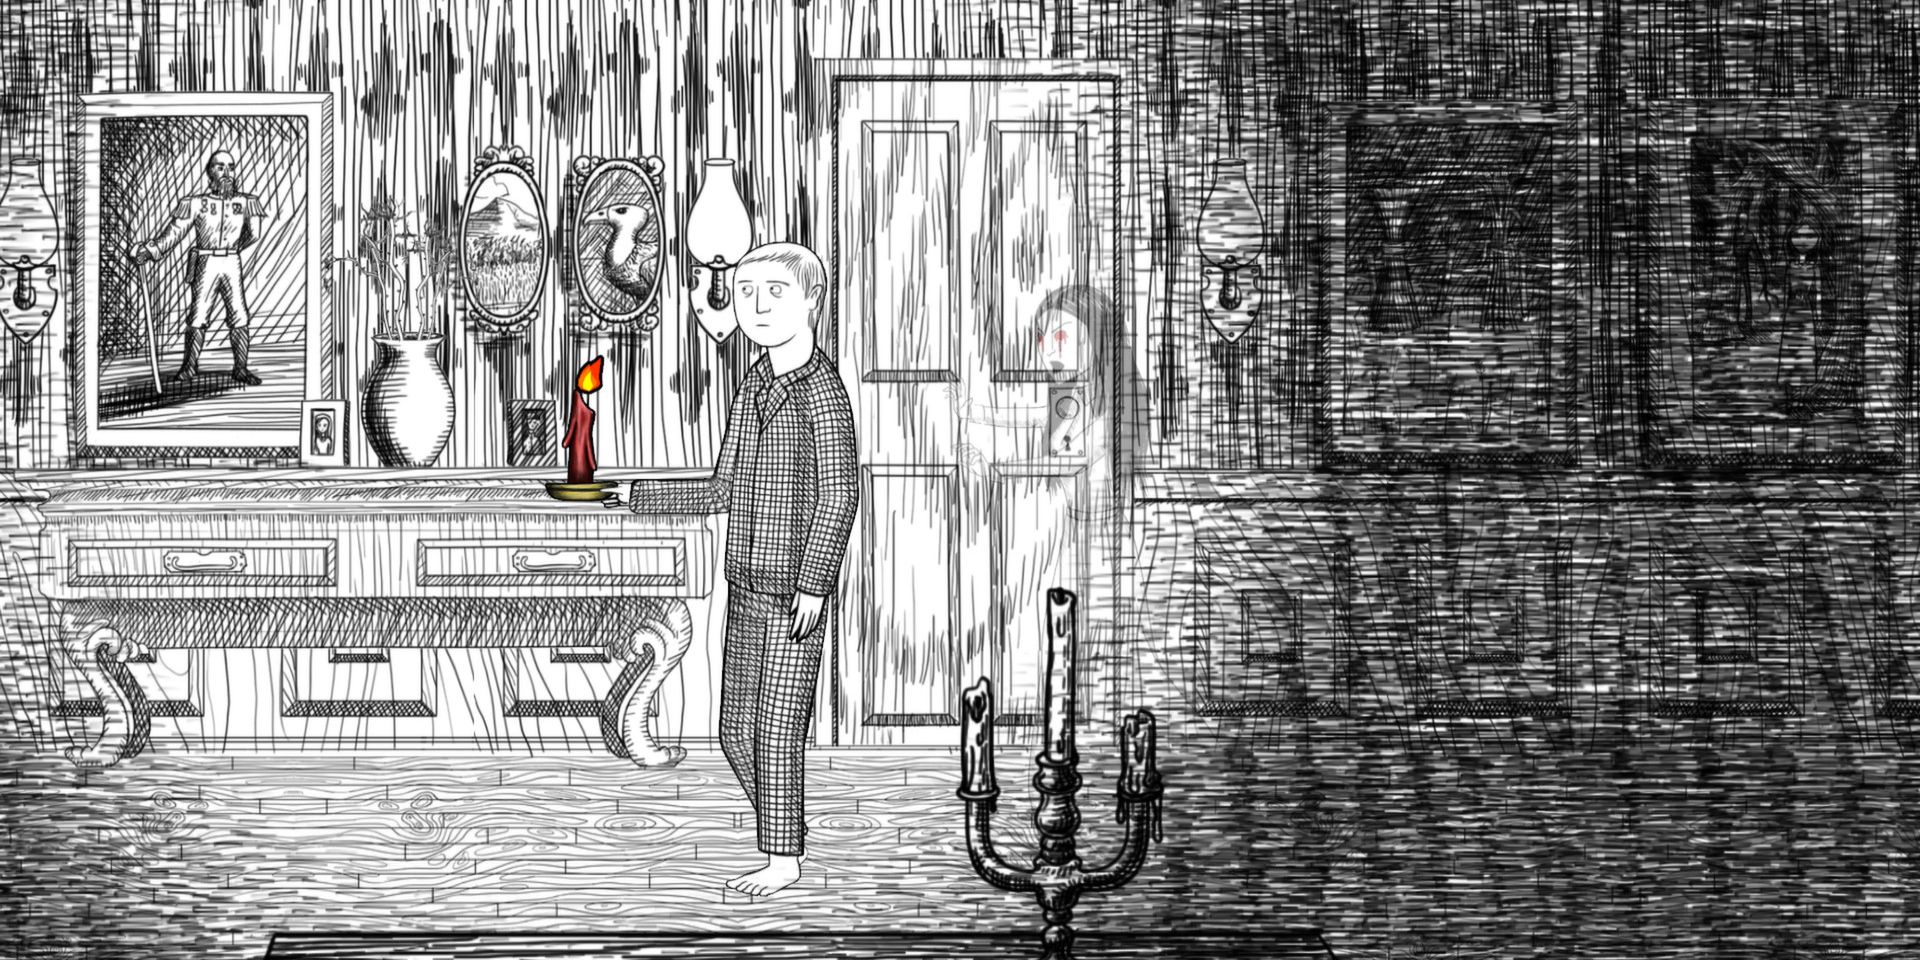 A man holds a candle as ghost floats behind him in Neverending Nightmares.